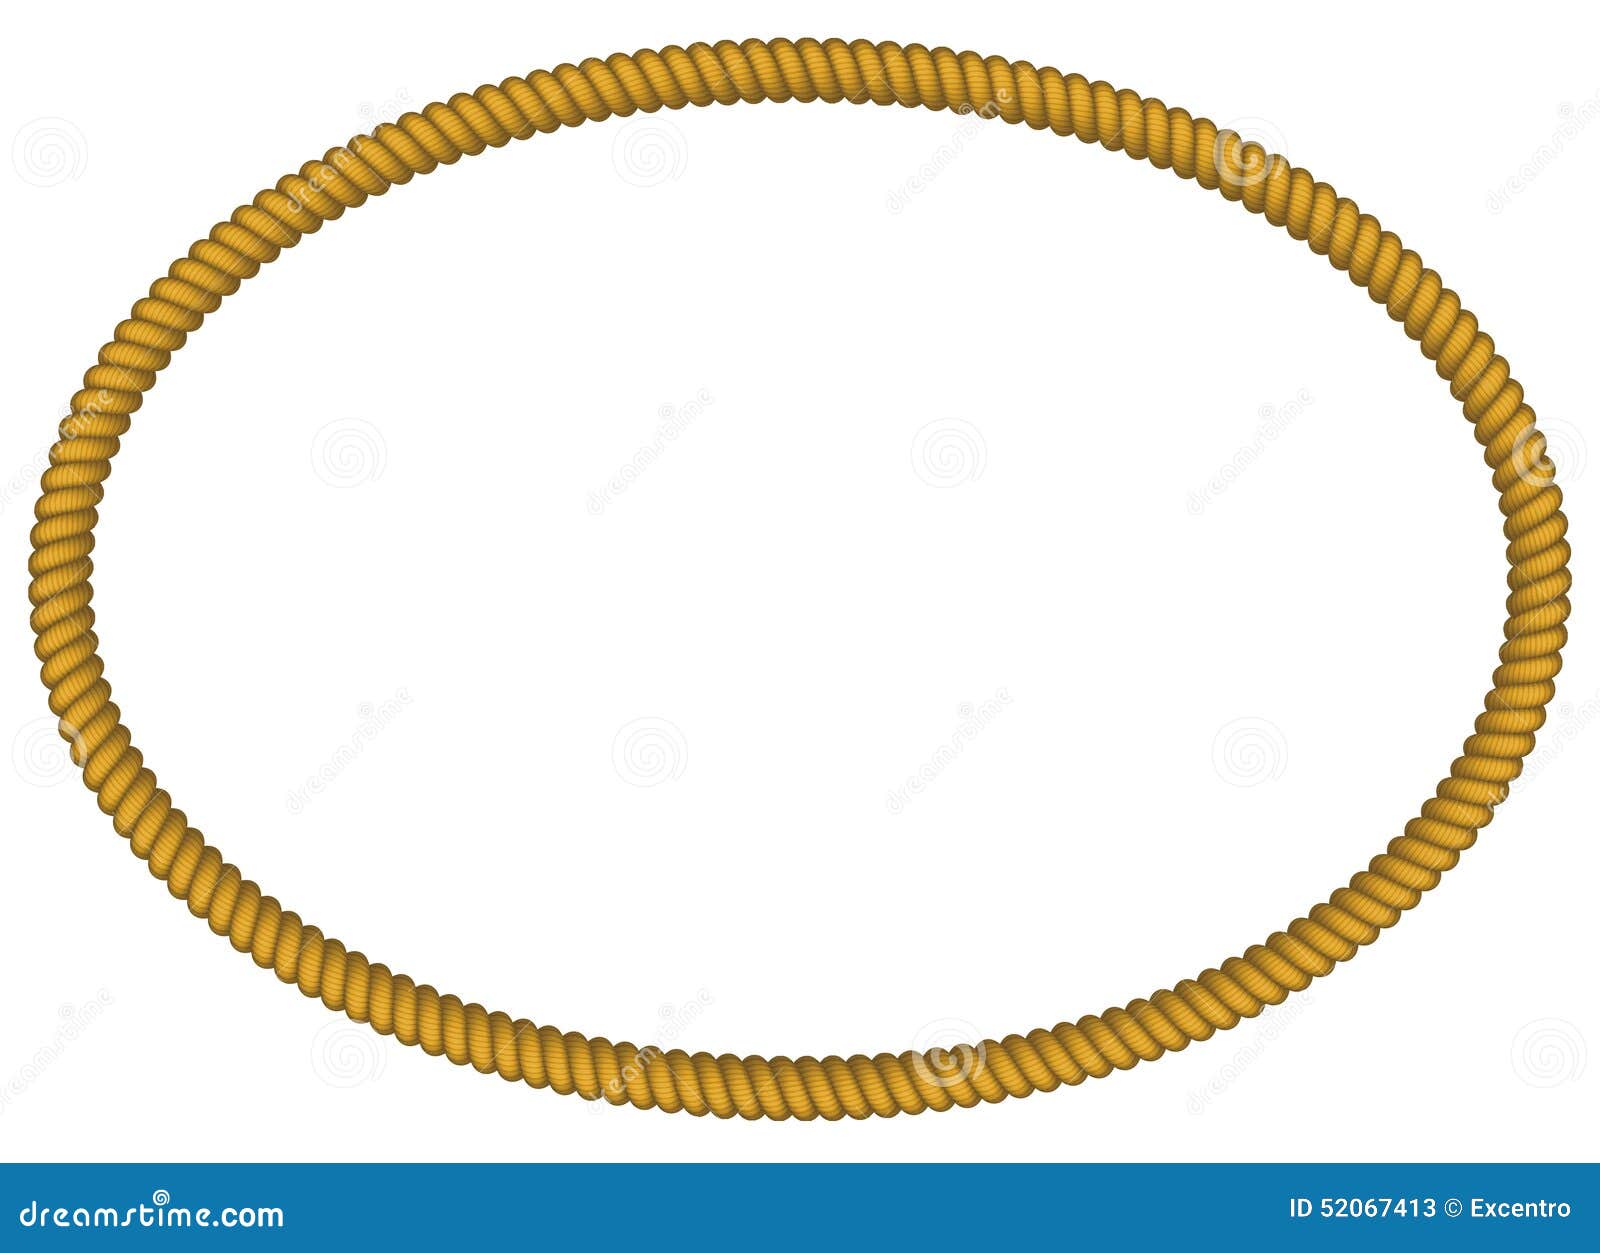 vector free download rope - photo #30